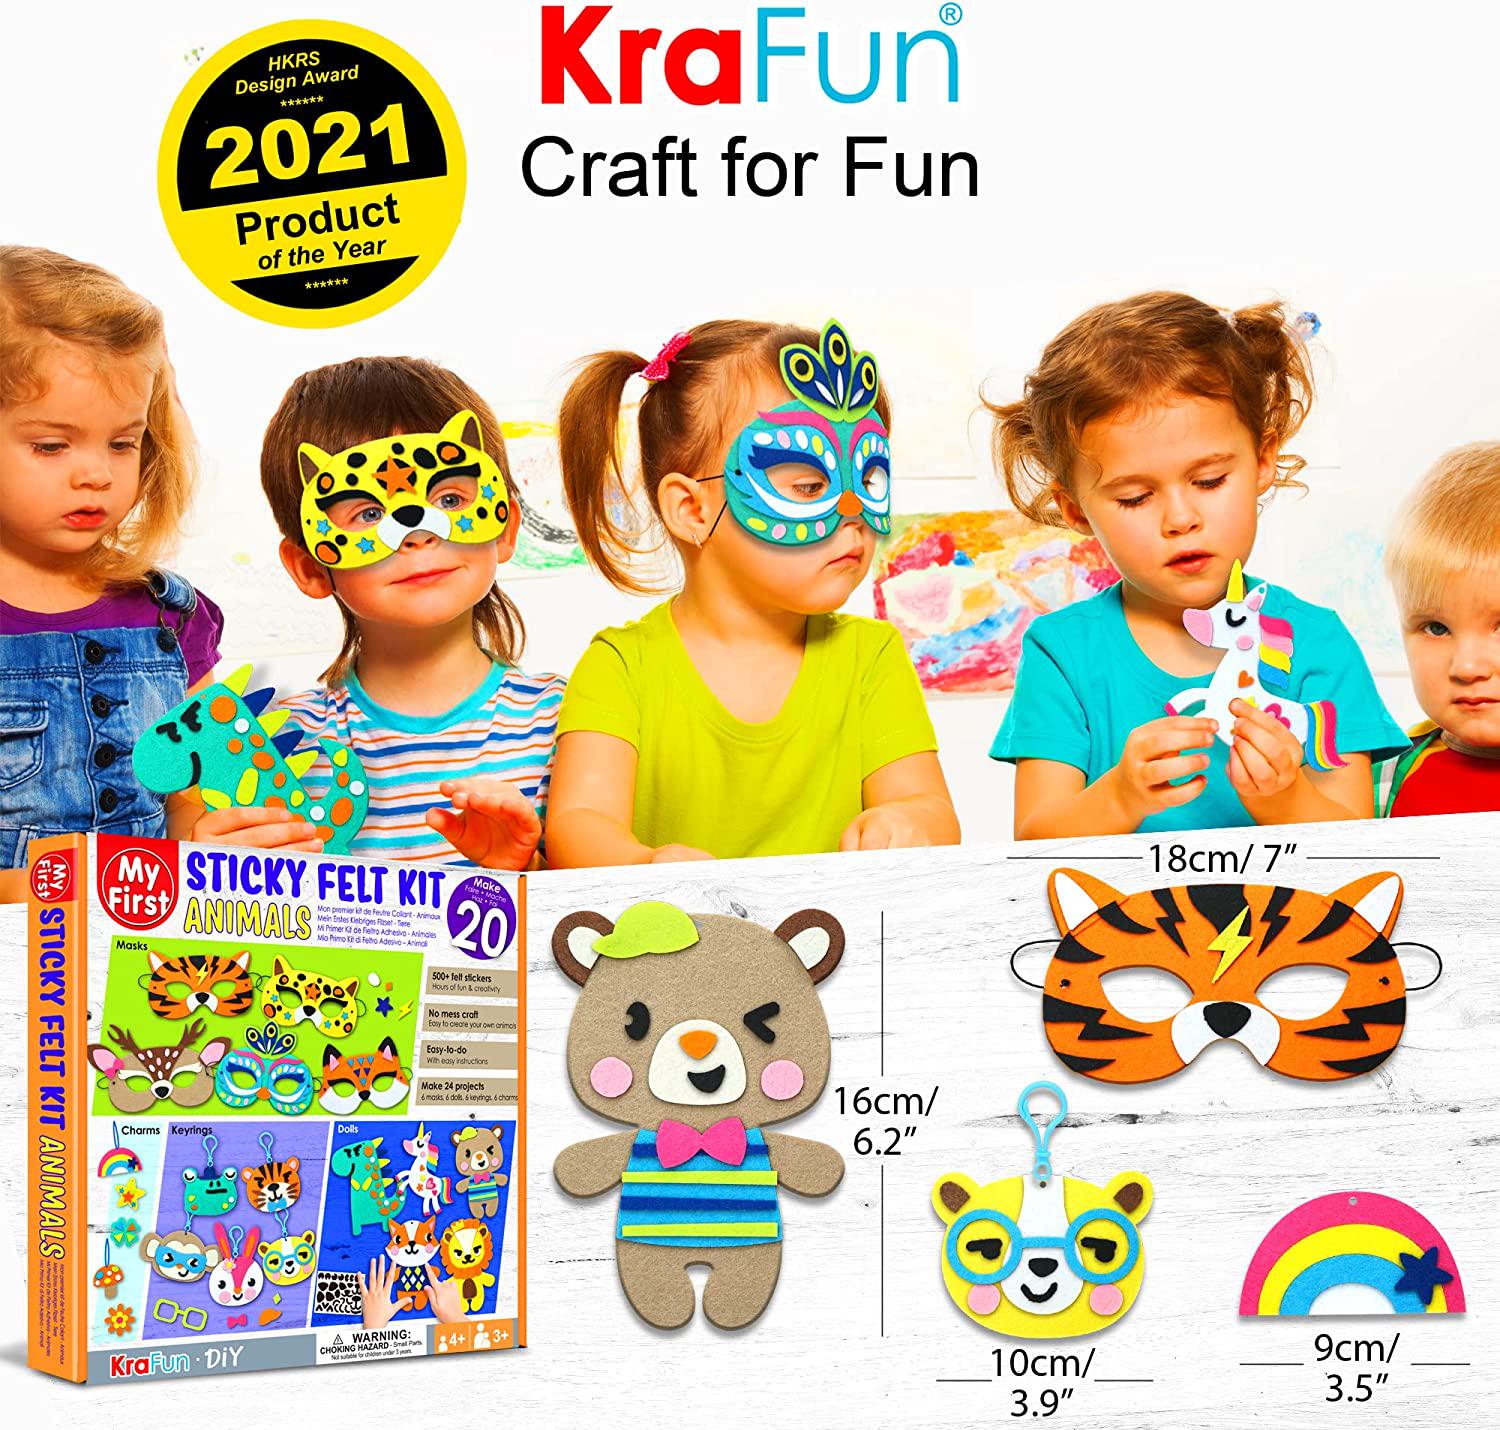 KRAFUN, KraFun Beginner My First Sticky Felt Kit Animal for Kids Art and Craft, Includes 24 Easy Projects for Party Masks, Dolls, Keyrings and Charms, Instruction and Felt Materials for Learning DIY Skills